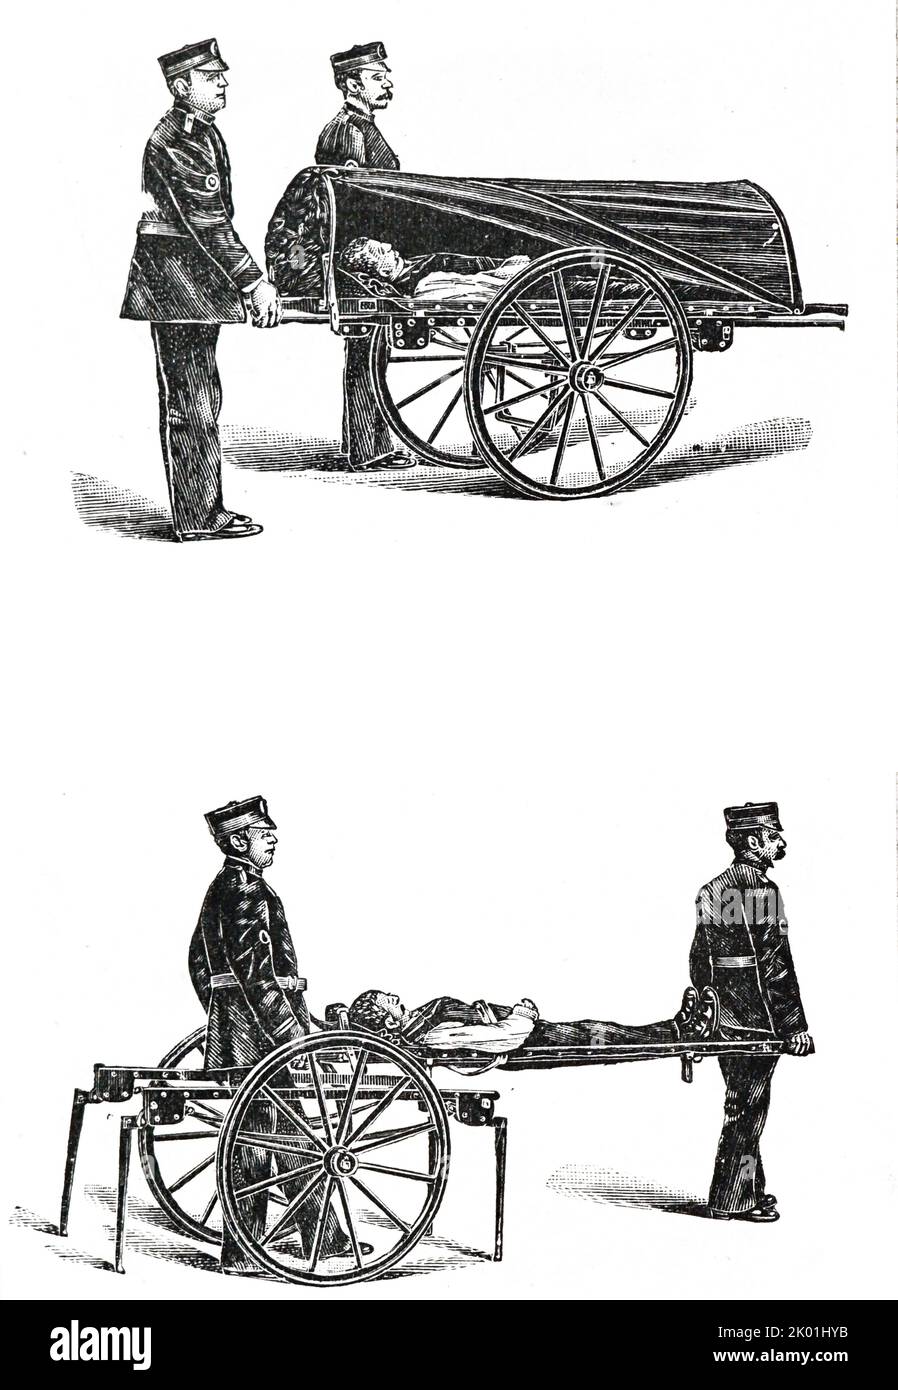 The St John's ambulance wheel litter. The cost of the apparatus was £16. From The Family Physician, Cassell & Co Ltd, London, nd c.1895. Stock Photo